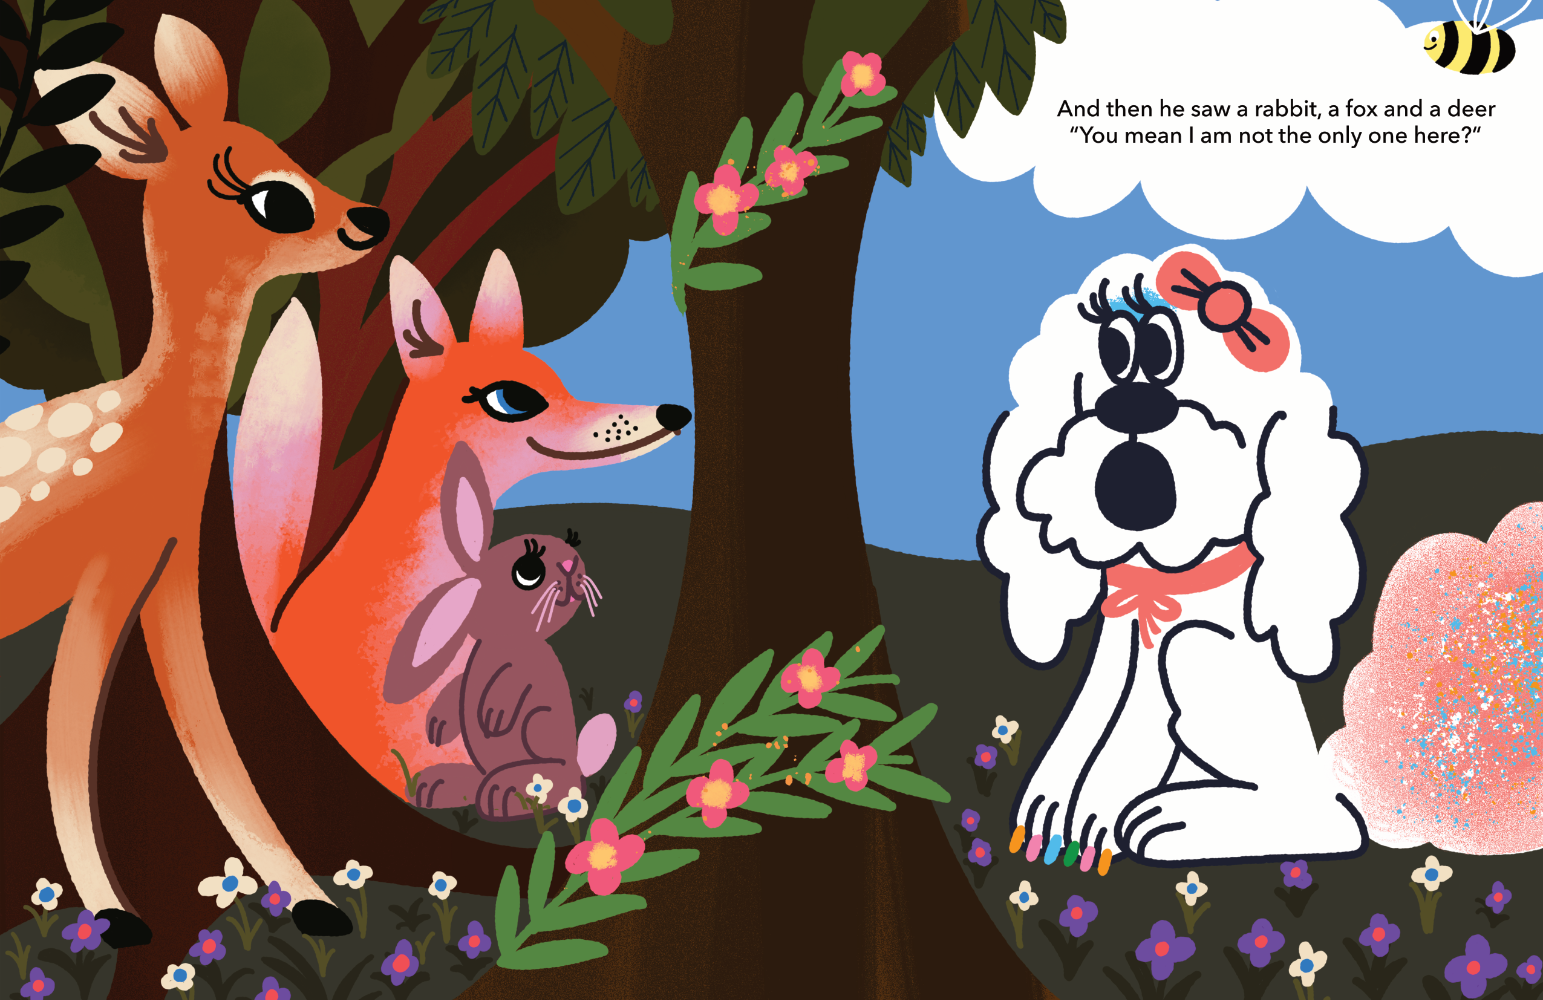 whats-beyond-may-head-childrens-book-page-spread-3-lars-madsen-illustration.png